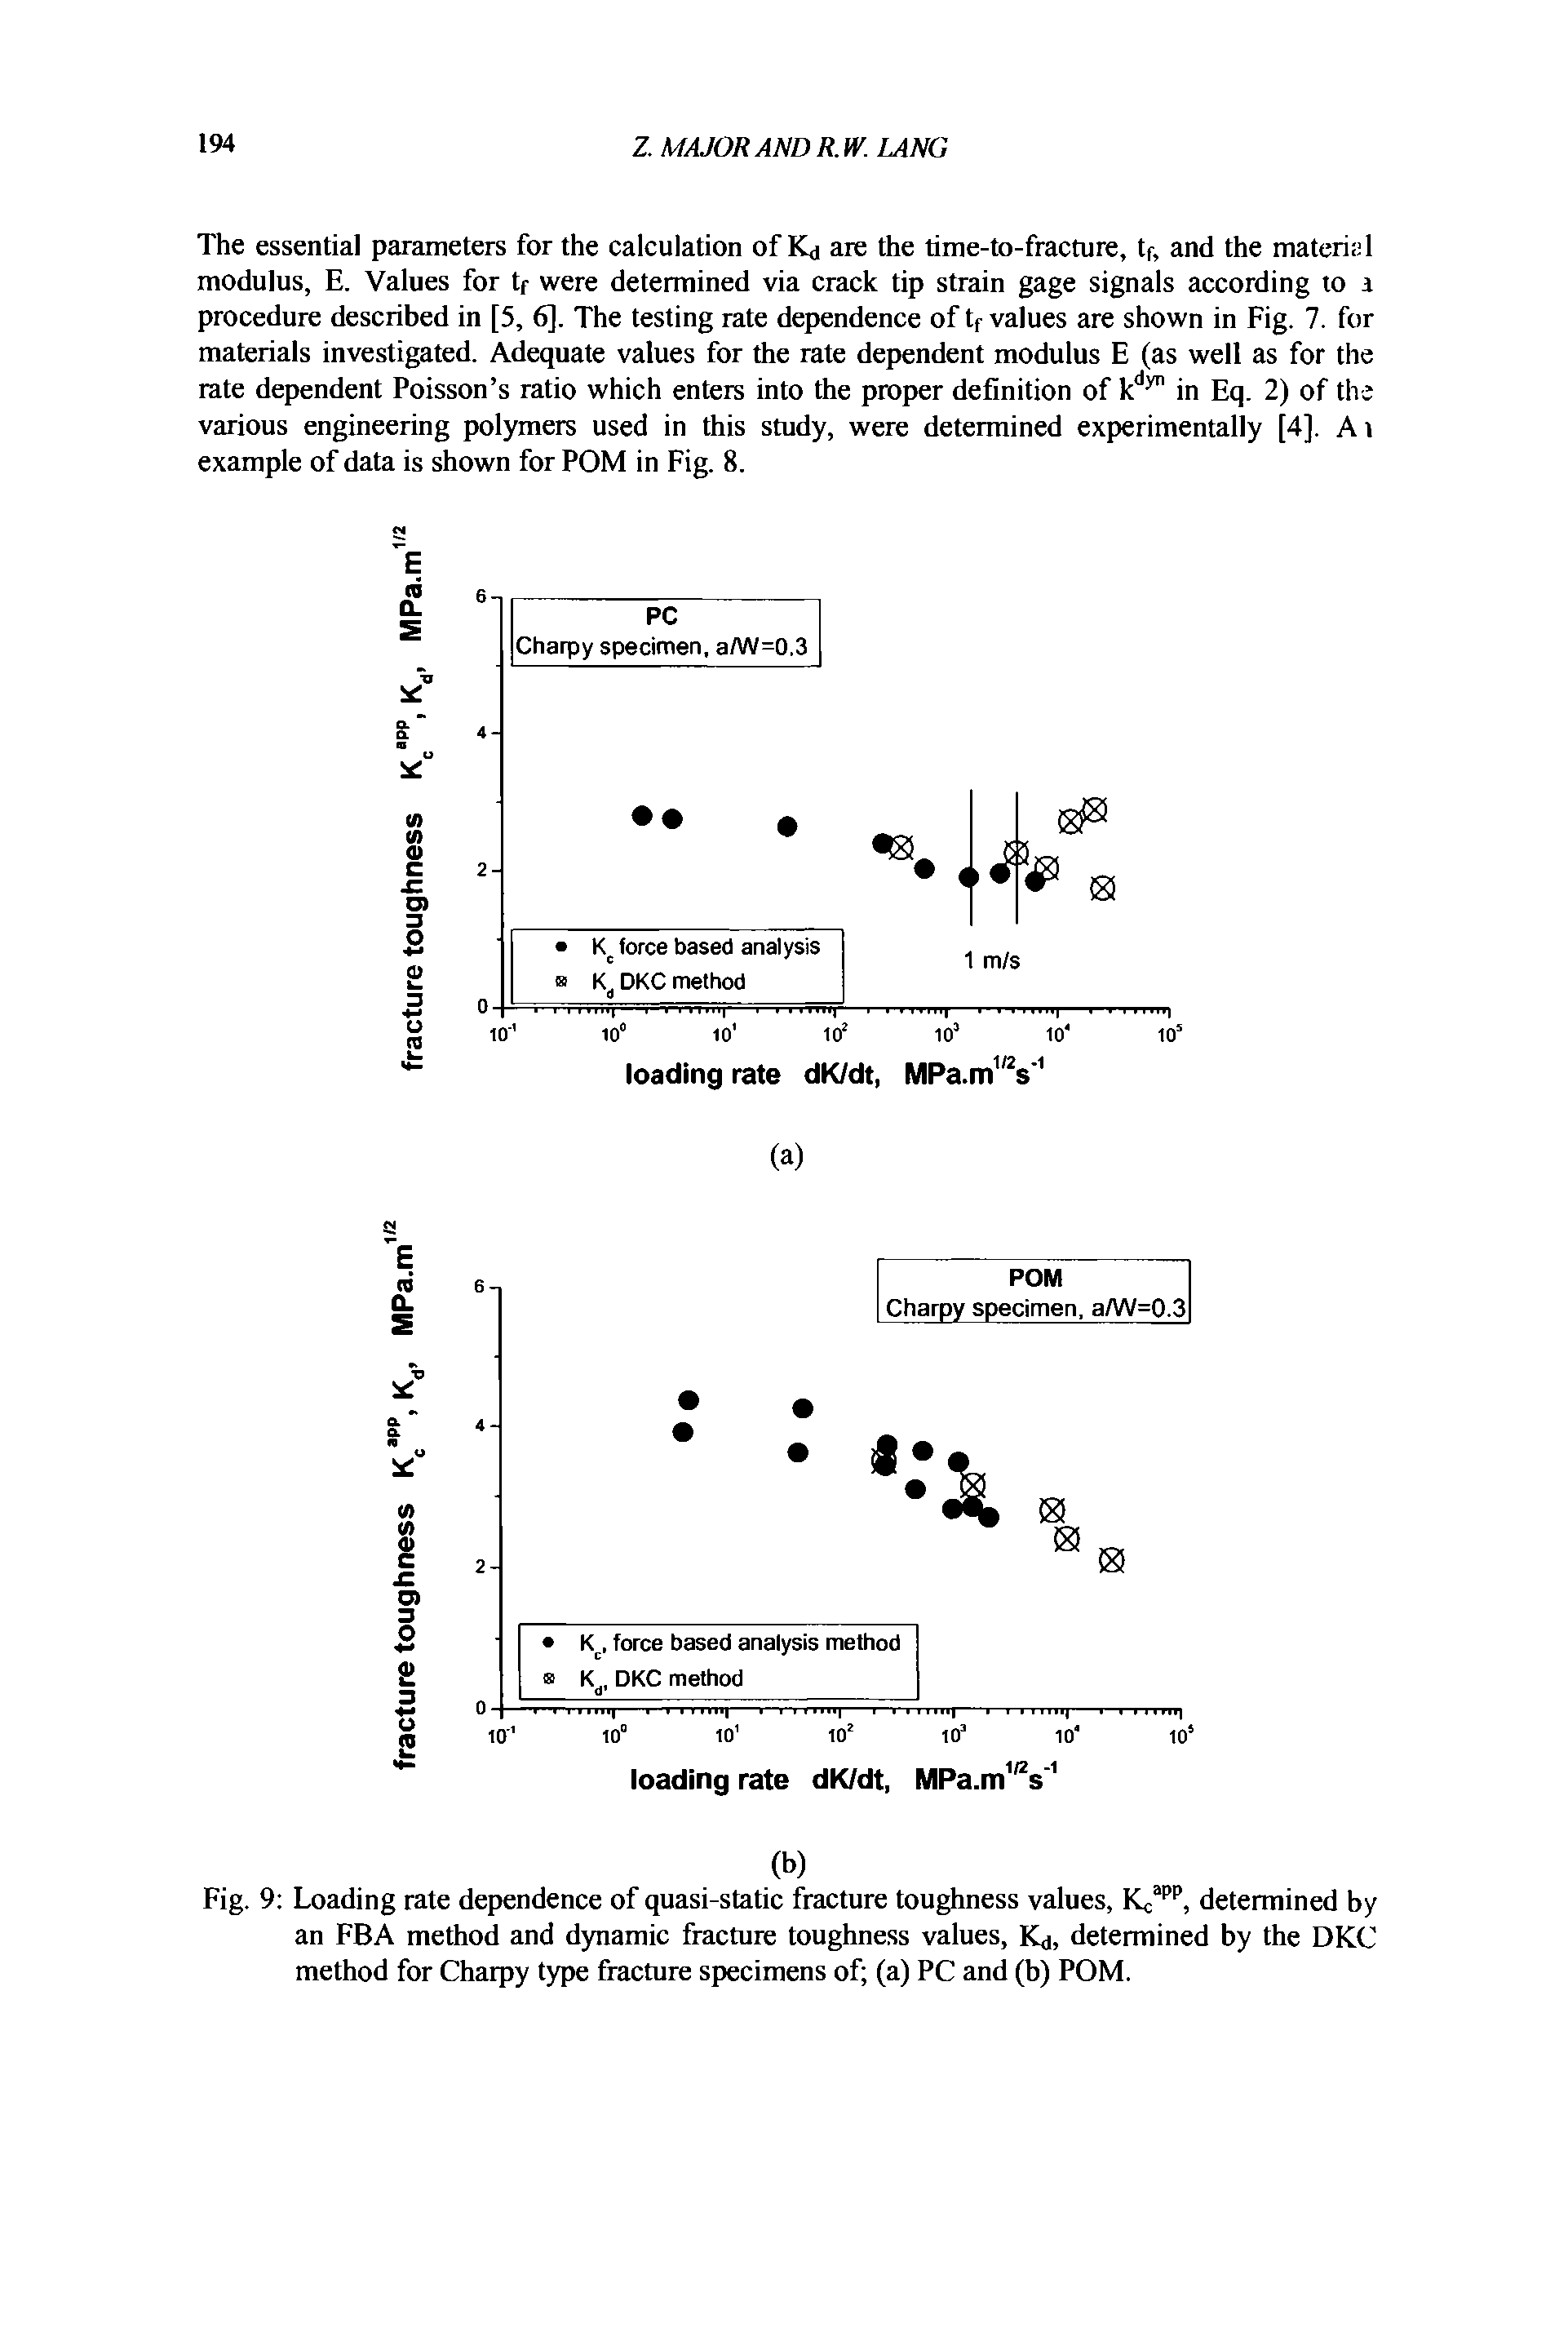 Fig. 9 Loading rate dependence of quasi-static fracture toughness values, determined by an FBA method and dynamic fracture toughness values, Kj, determined by the DKC method for Charpy type fracture specimens of (a) PC and (b) POM.